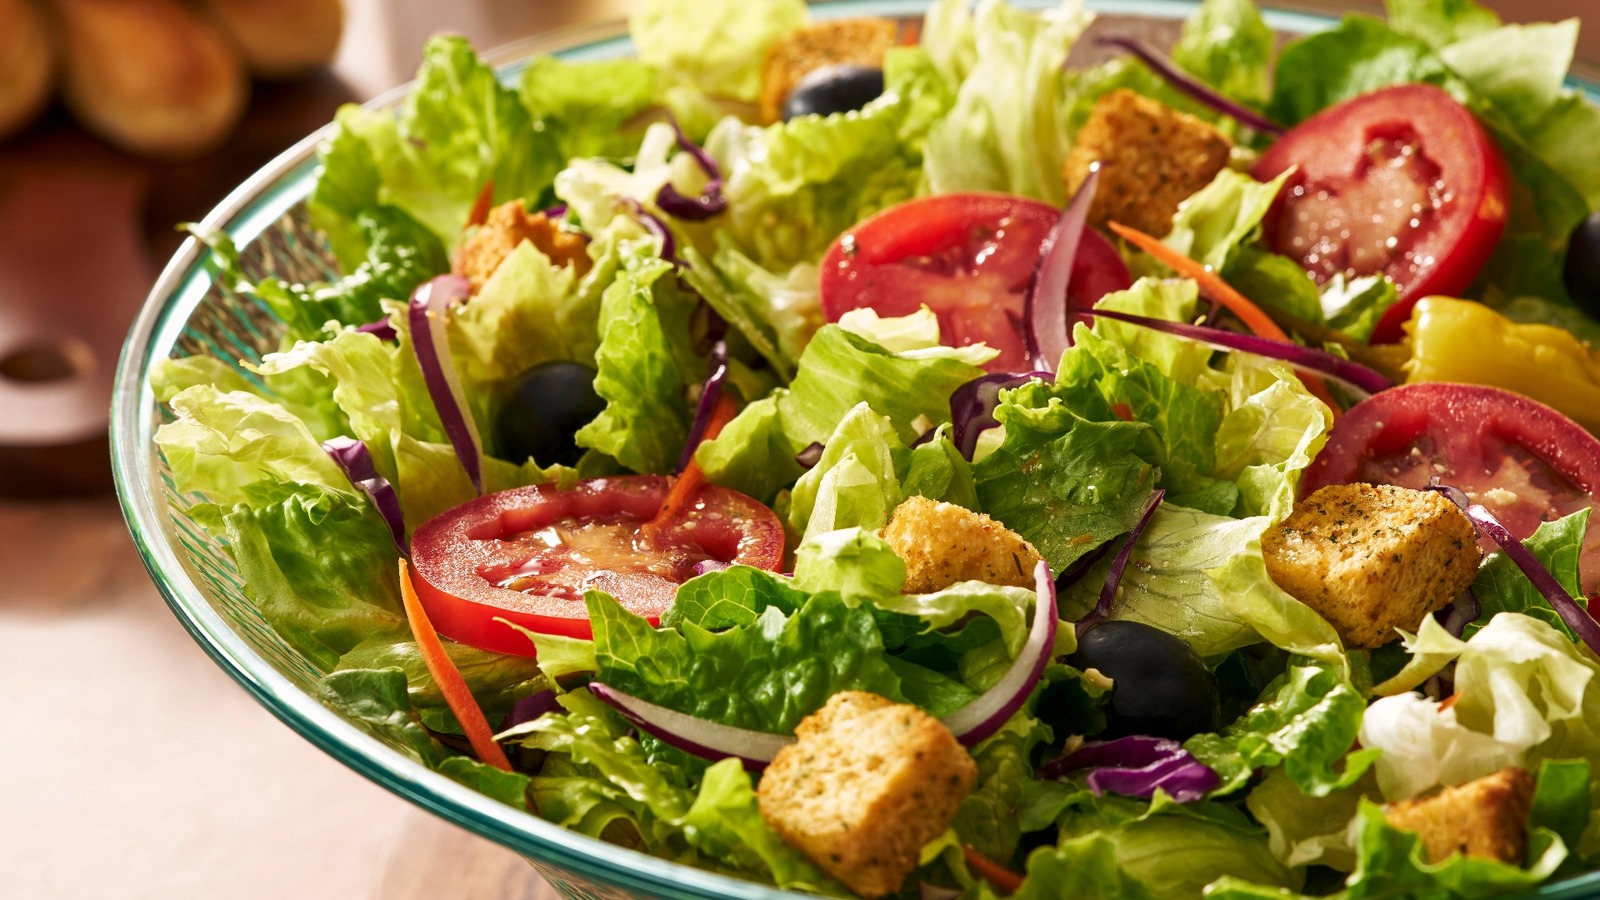 Is Olive Garden's Salad Prepared In-House?